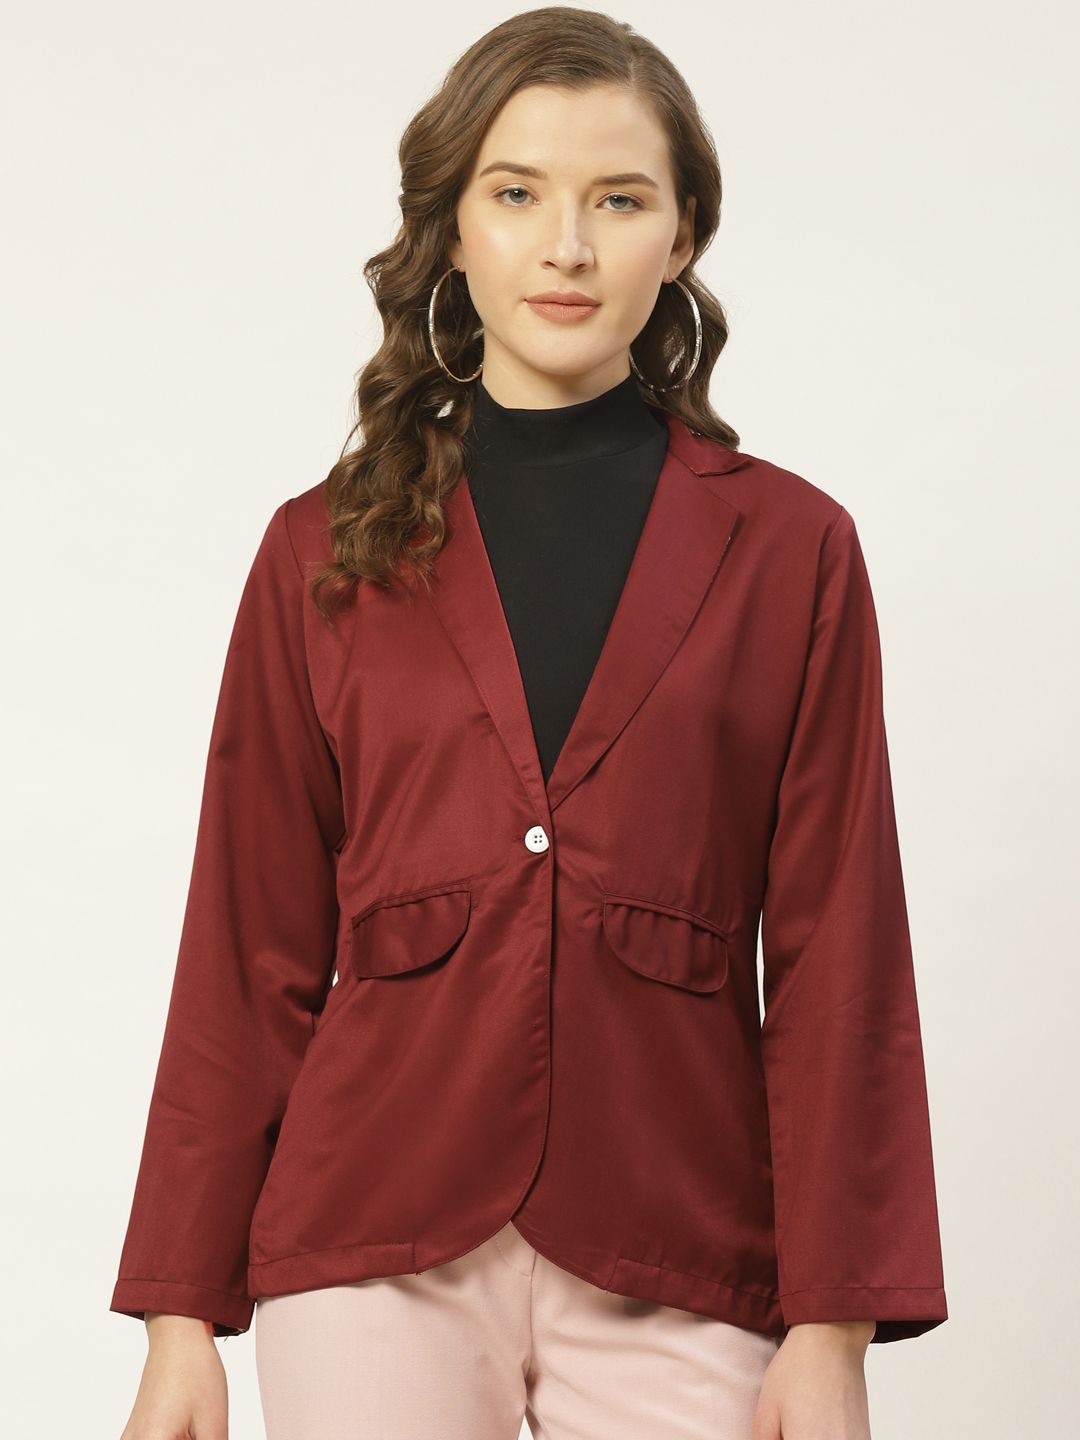 JAINISH Women Maroon Solid Twill Weave Single-Breasted Smart Casual Blazer Price in India